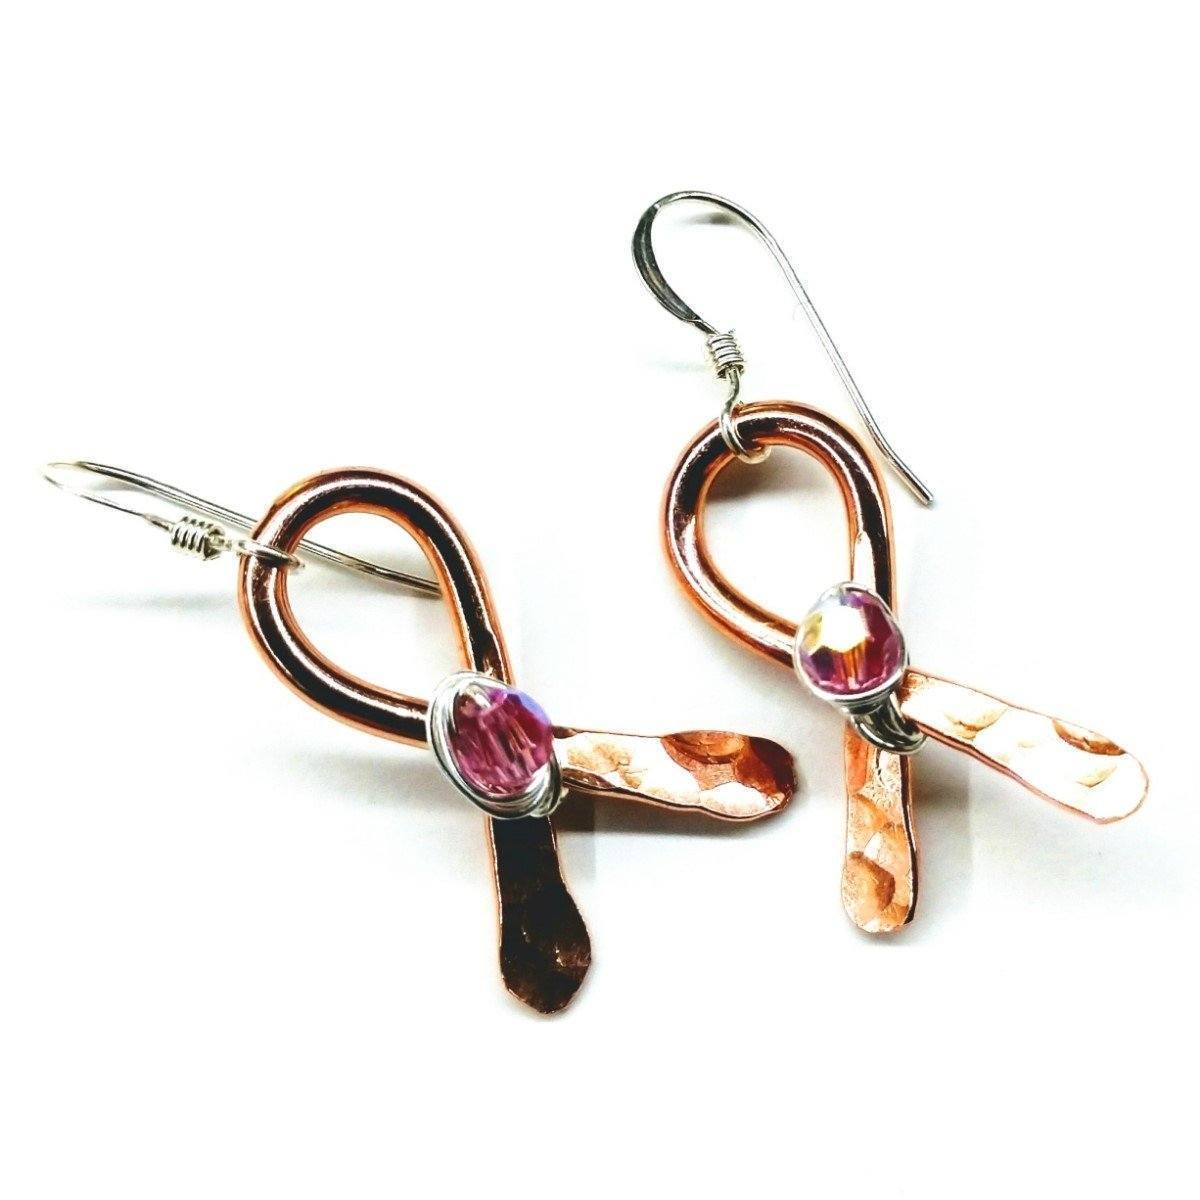 Handcrafted Copper Ribbon Earrings with Swarovski Crystals for Breast Cancer Awareness - Earrings - Bijou Her -  -  - 